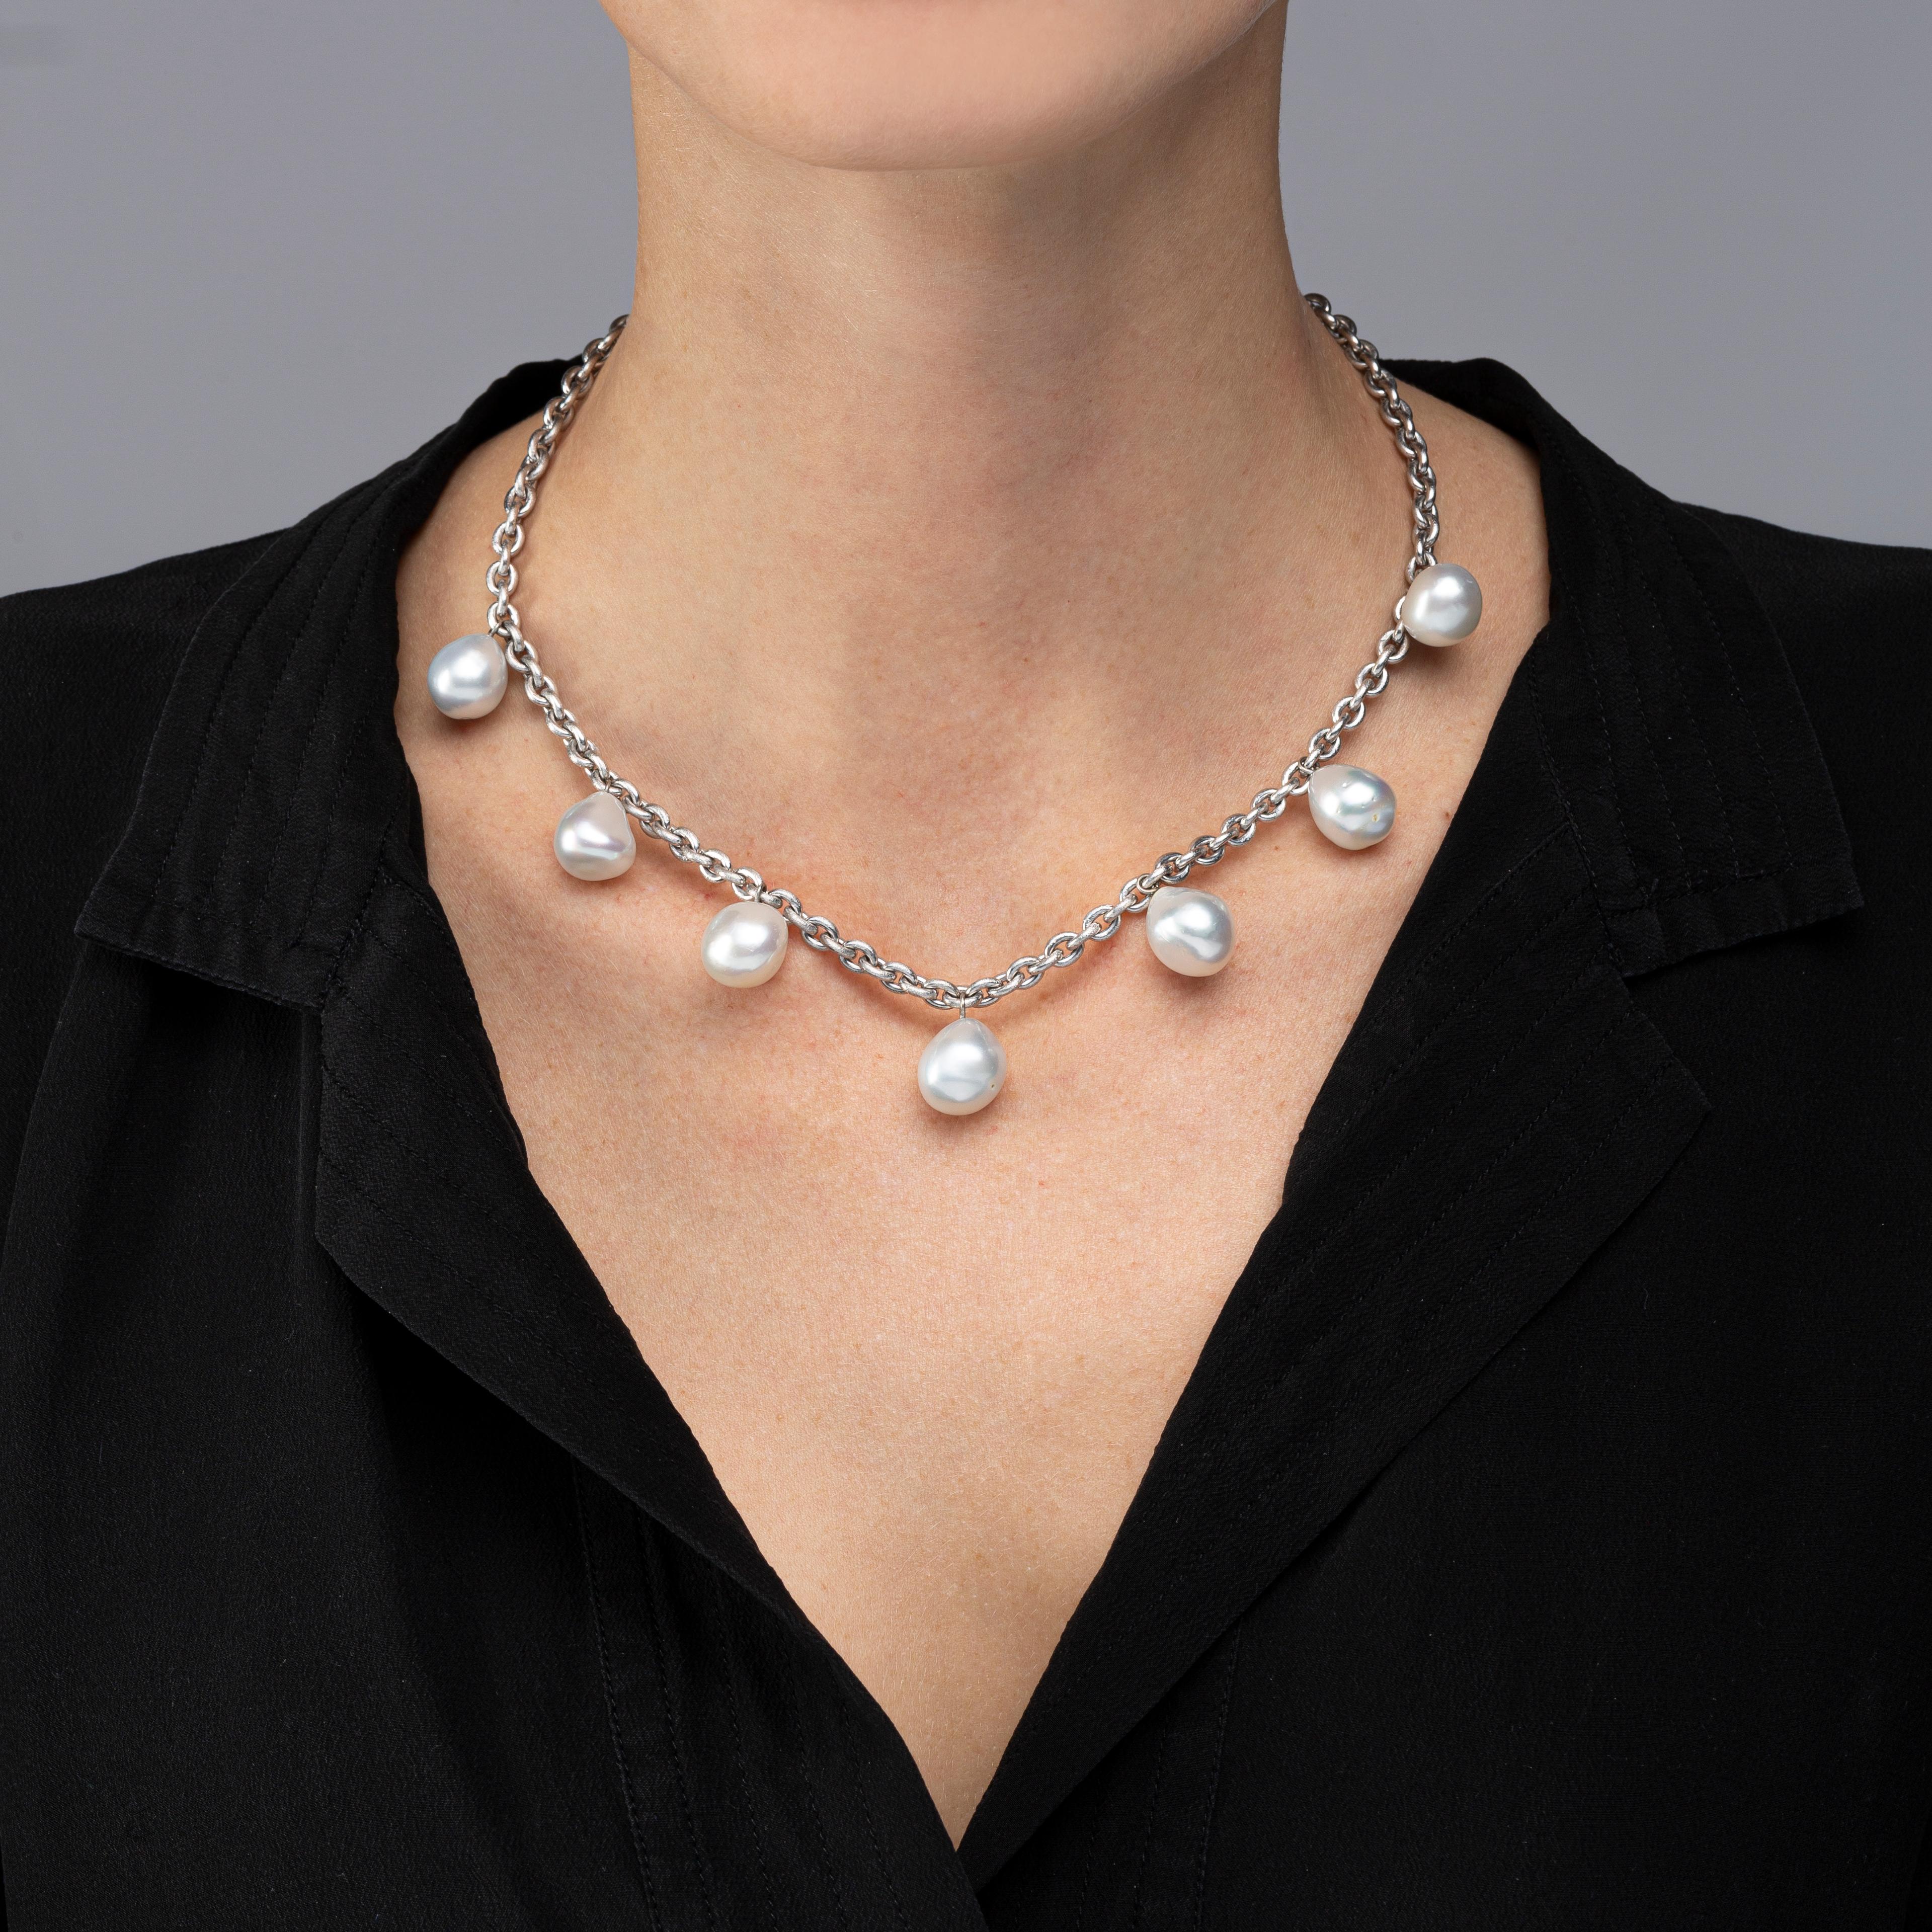 Alex Jona design collection, hand crafted in Italy, 18 karat white gold chain necklace with seven light grey South Sea baroque pearls.

Alex Jona jewels stand out, not only for their special design and for the excellent quality of the gemstones, but